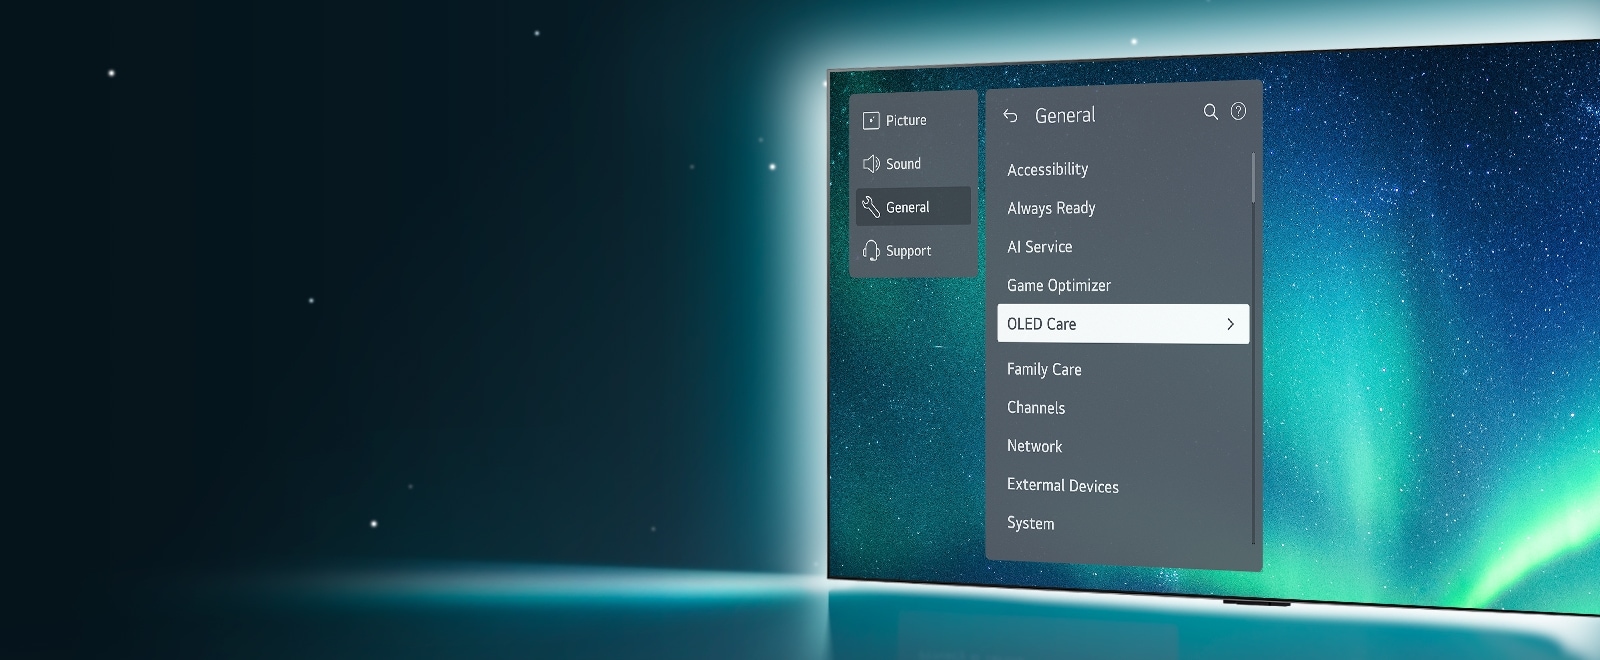 OLED TV is standing majestically on the right side of the image and the background is shimmering like the night sky. As white lights are shining from the back of the TV. The Support menu is up on the screen, and the OLED Care menu is selected.